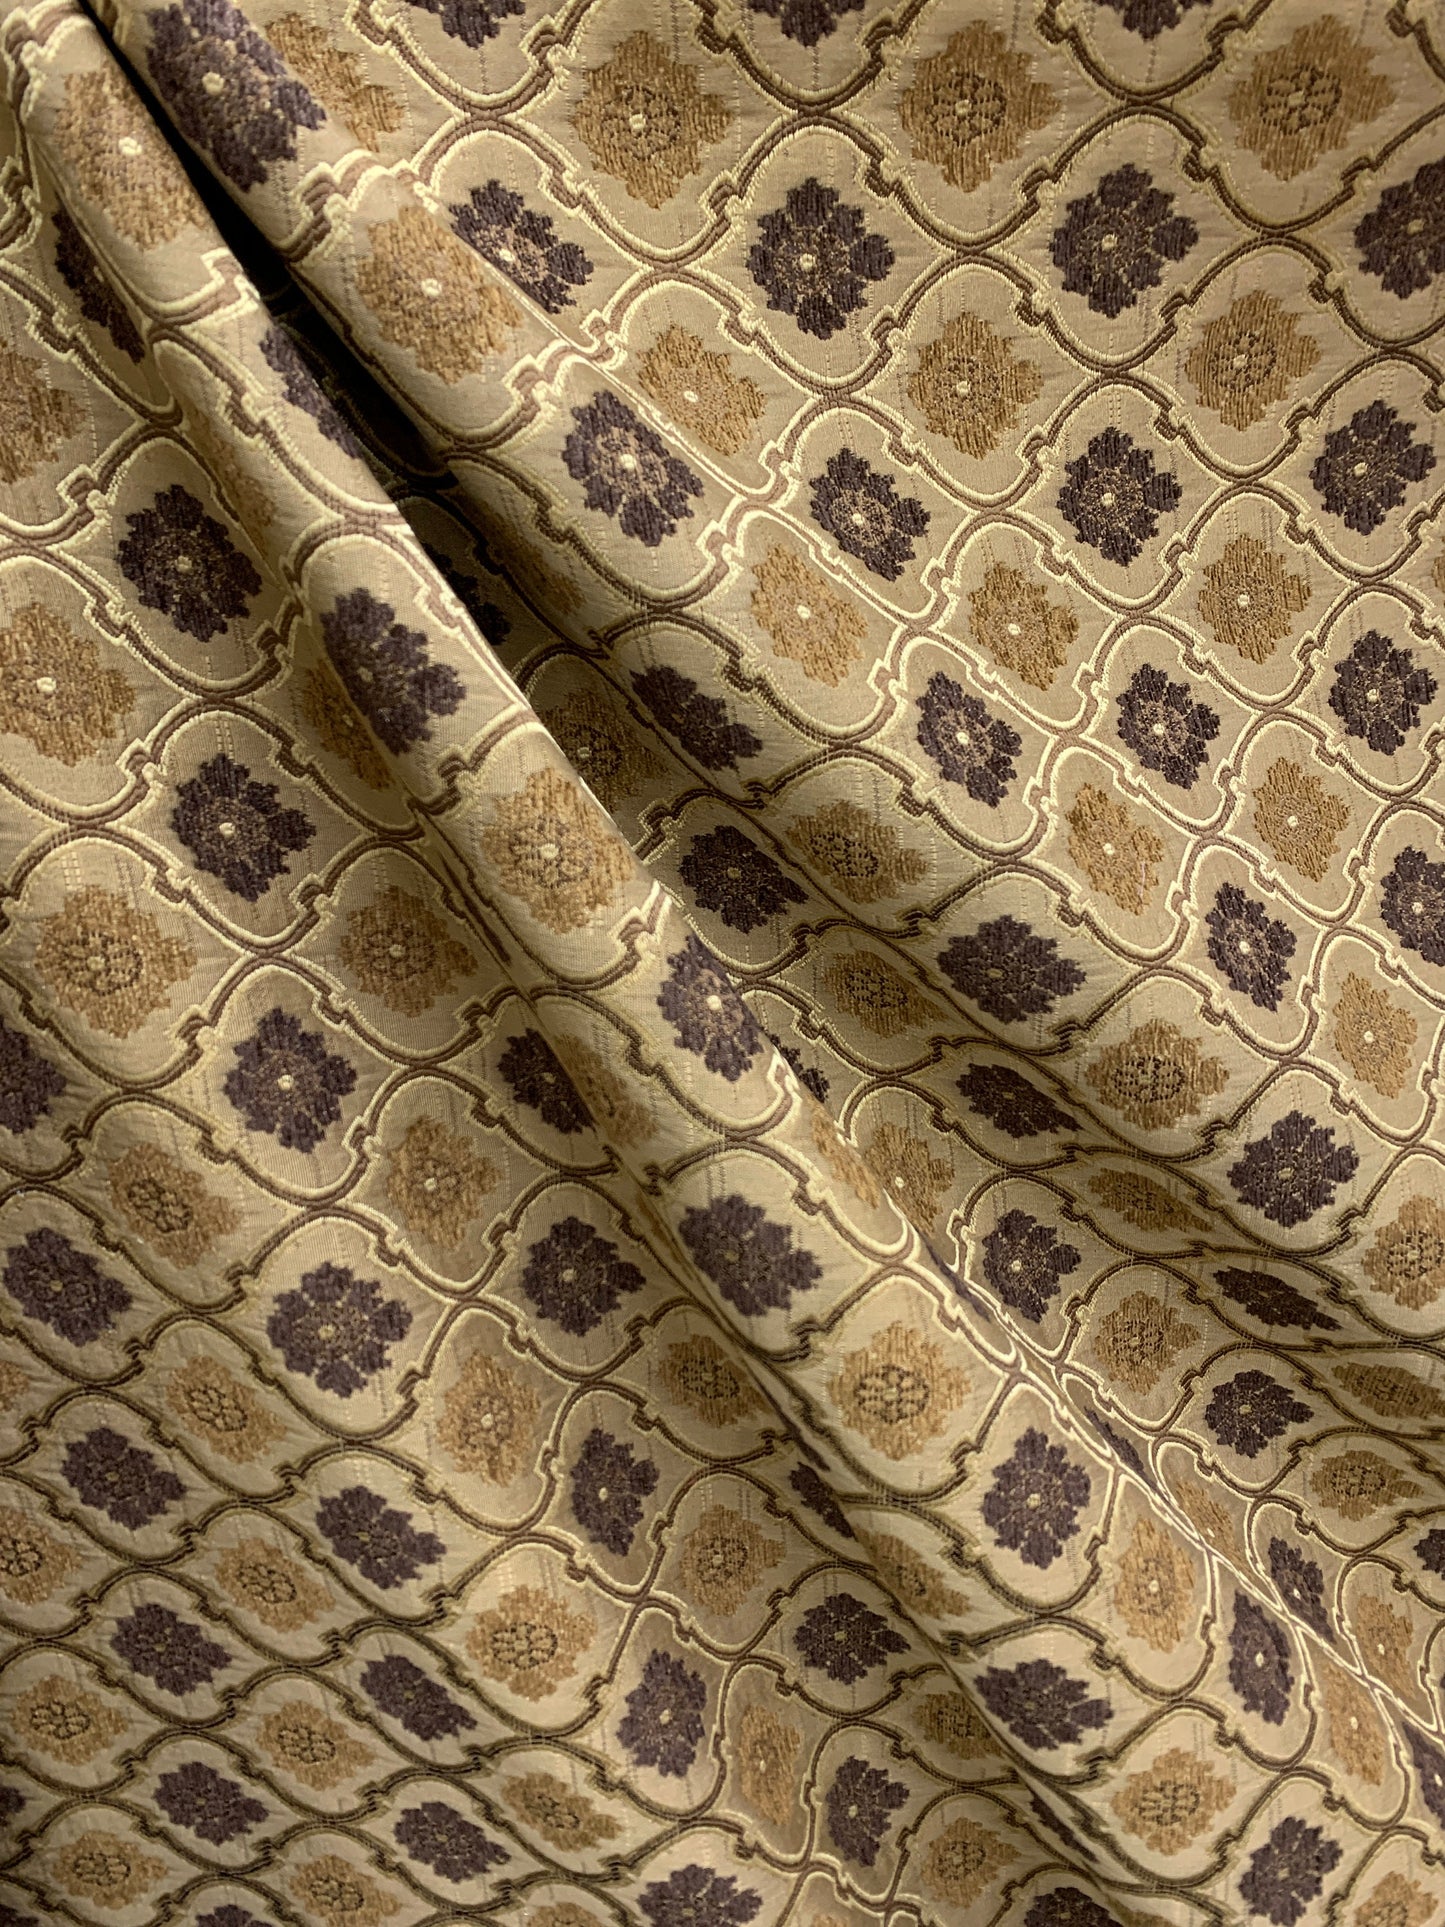 BROWN Floral Trellis Chenille Upholstery Brocade Fabric (56 in.) Sold By The Yard